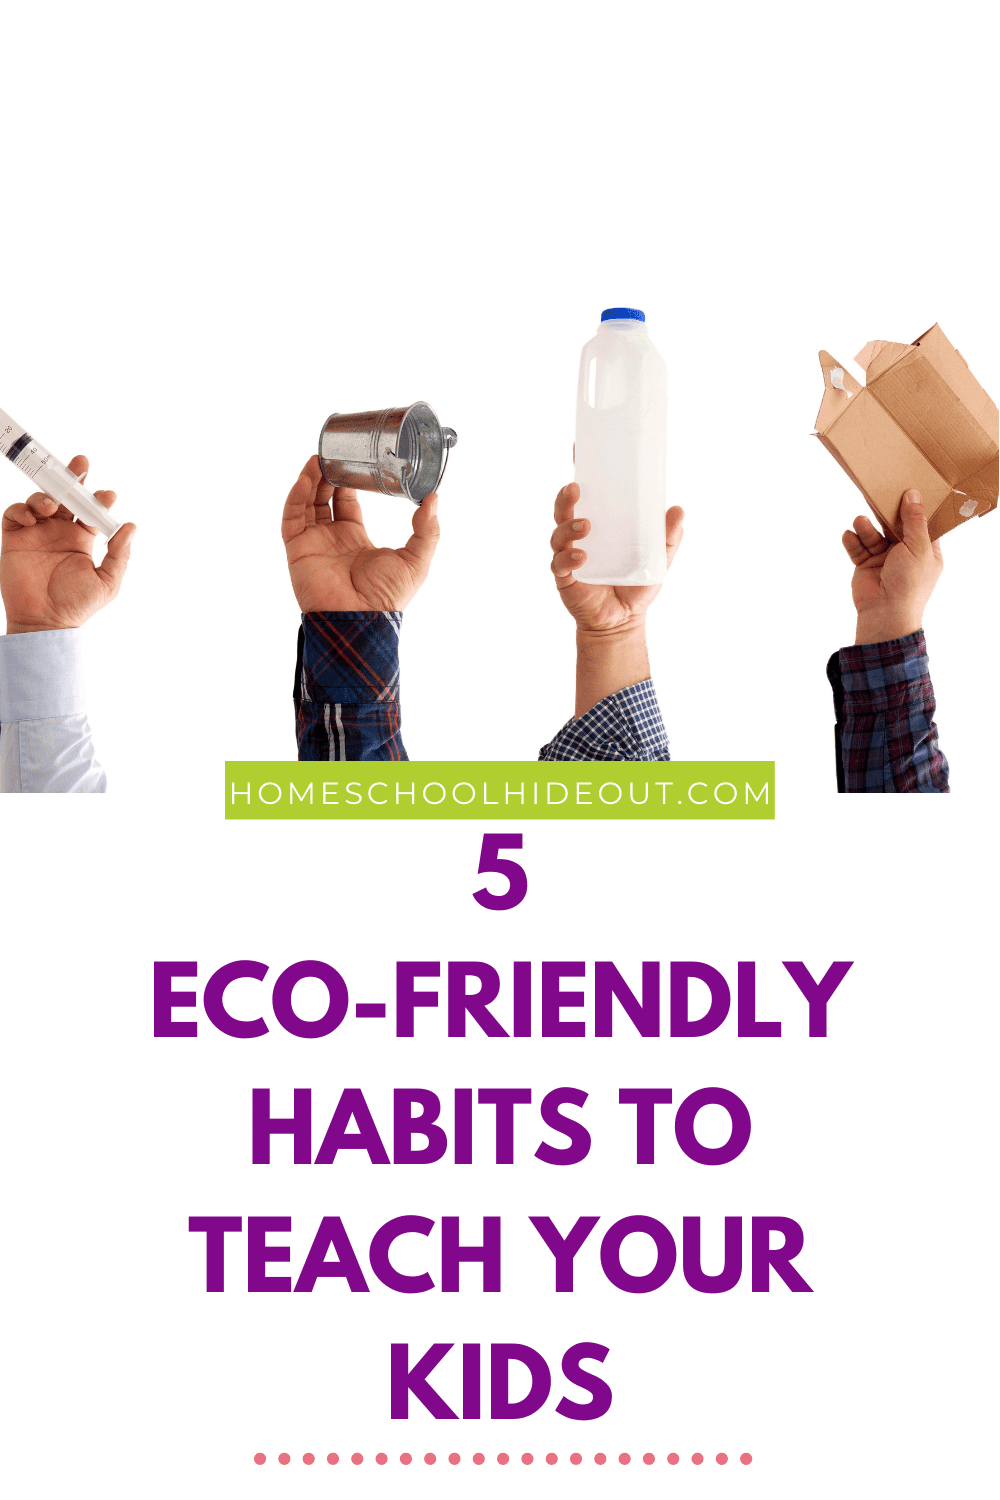 Establishing eco-friendly habits can really make a difference and it's just a small change!